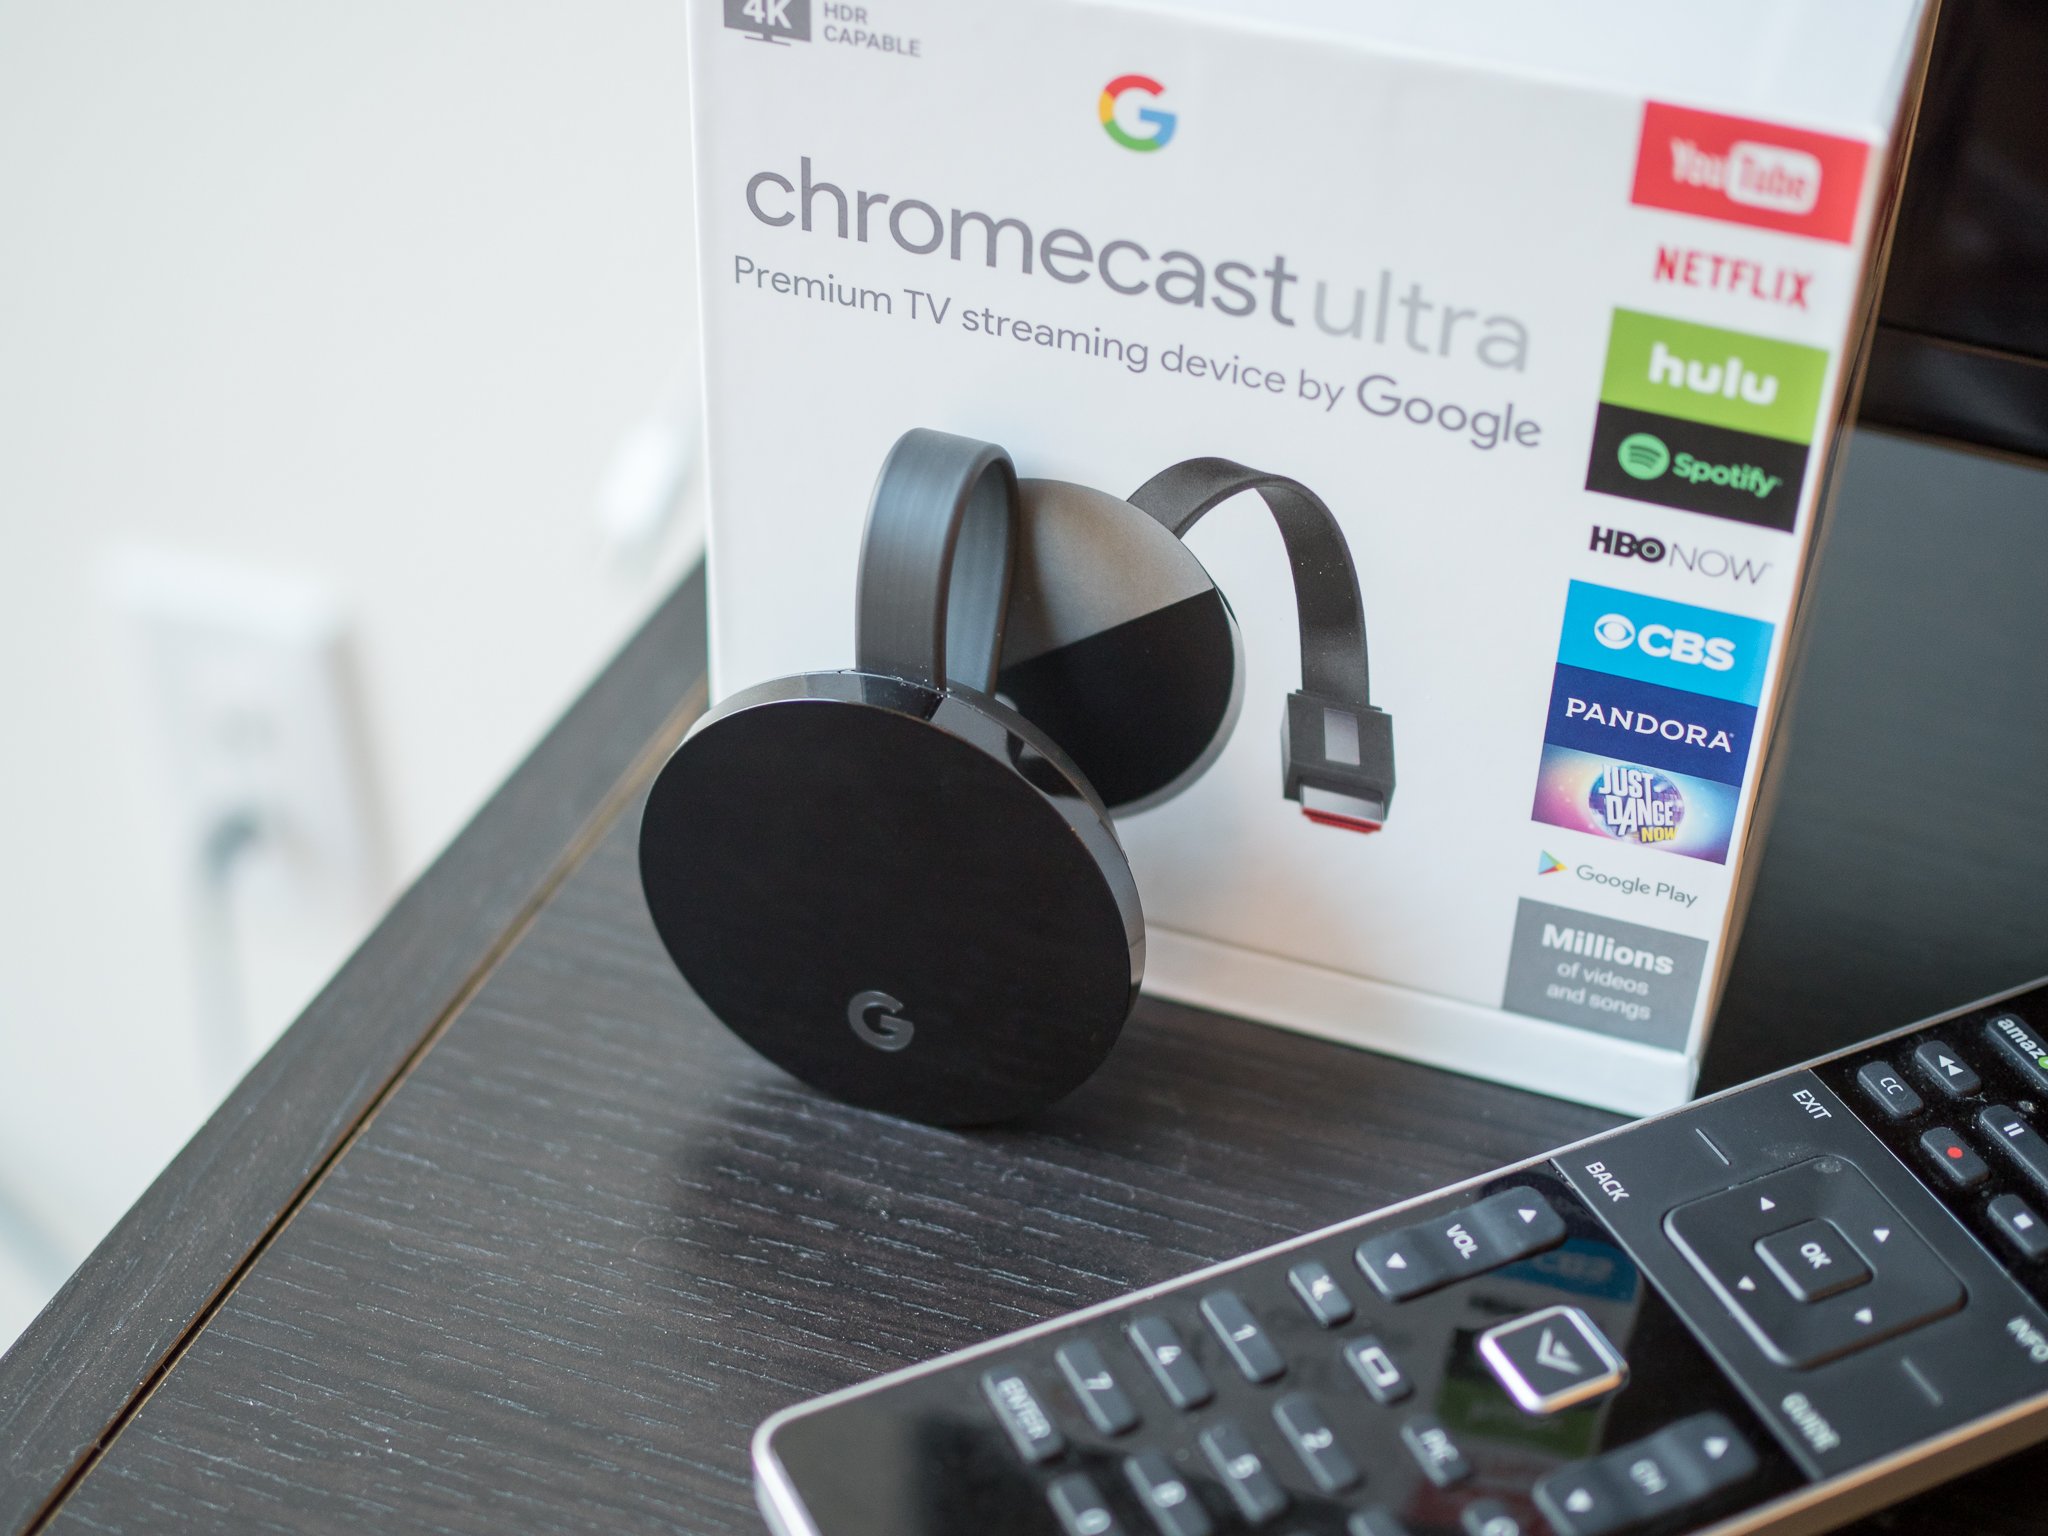 5 years on, Chromecast still has frustrating flaws that detract from the magic | Android Central